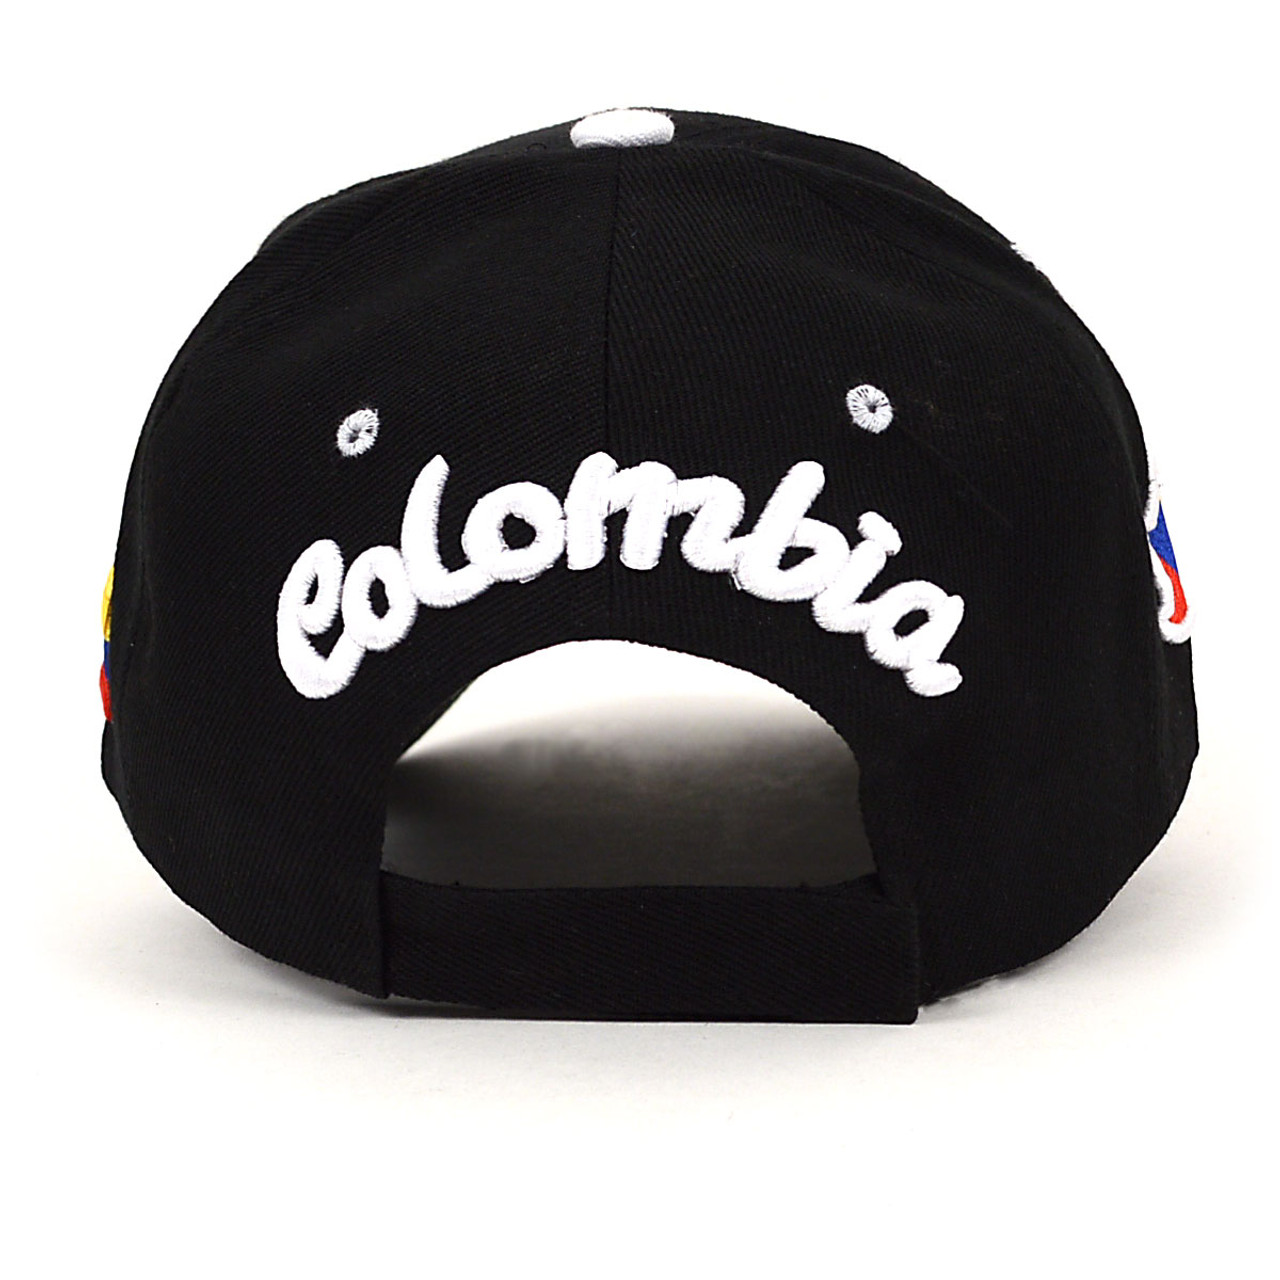 Colombia Black 3D Embroidered Baseball Cap, Hat EBC10306